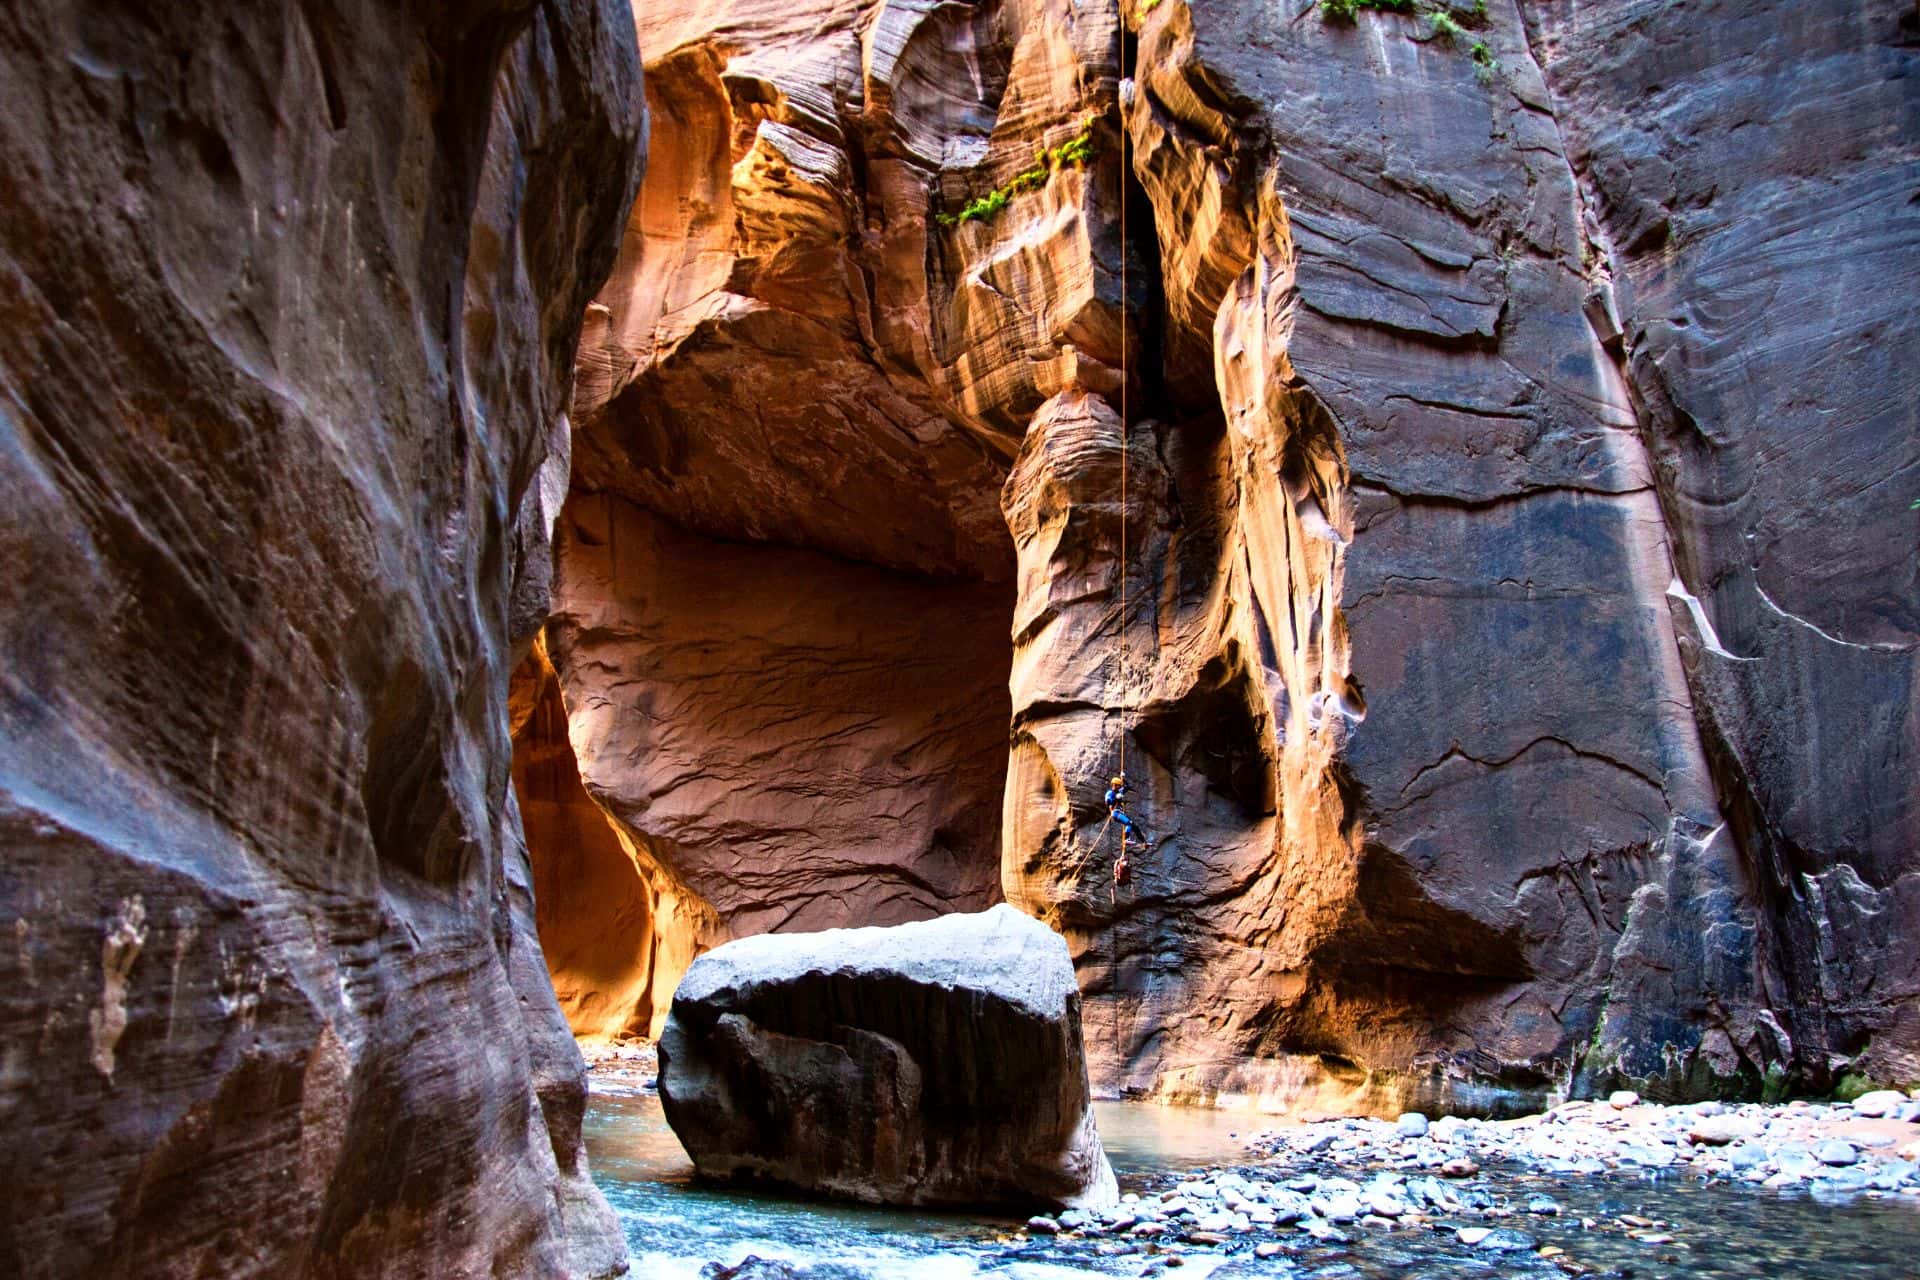 The Narrows in Zion